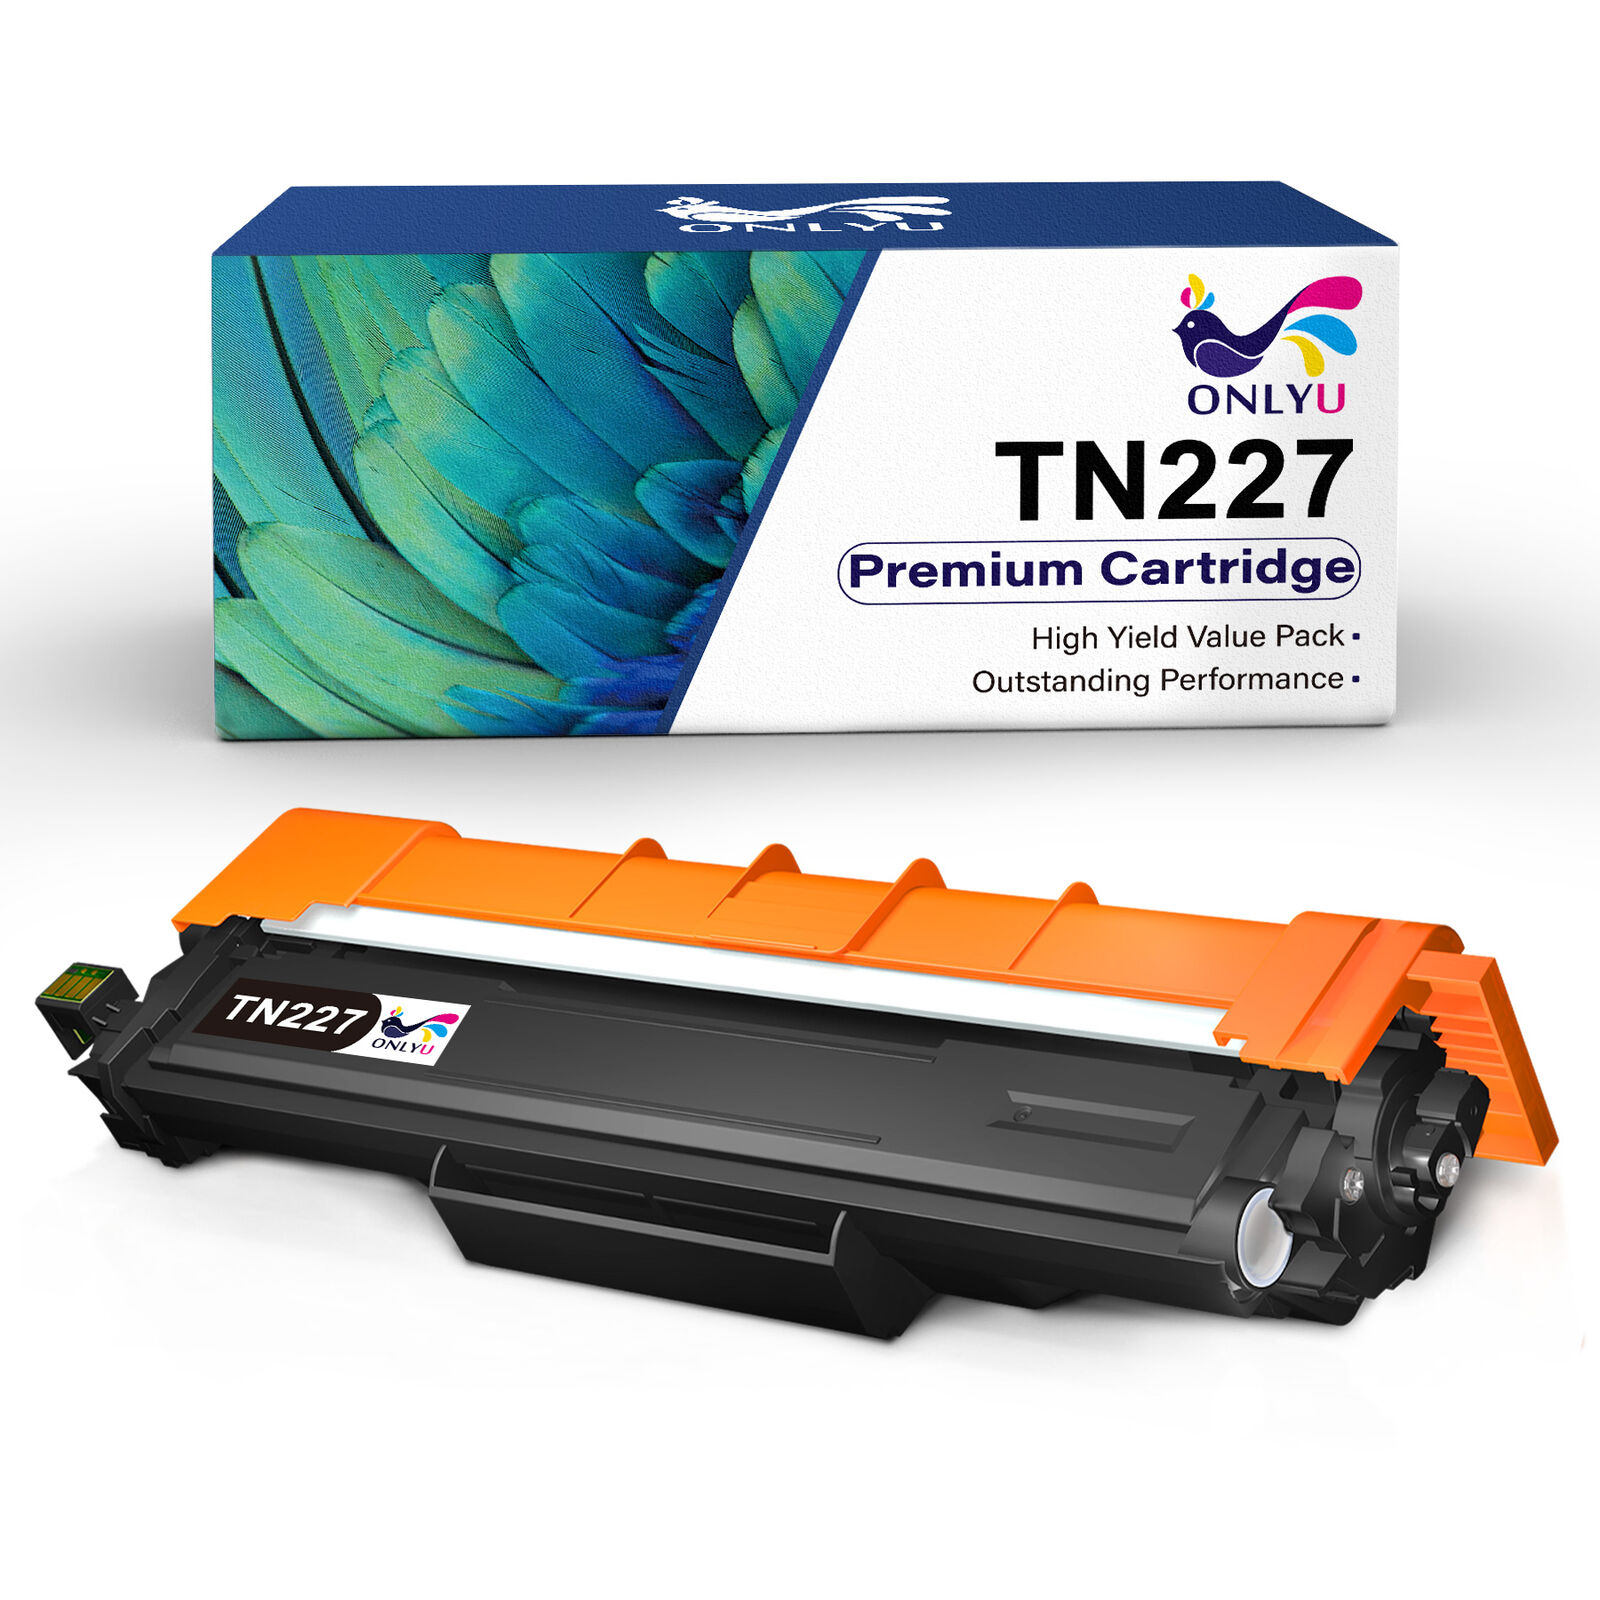 DR223 Drum TN227 Toner Cartridge replacement for Brother HL-L3270CDW 3290CDW Lot